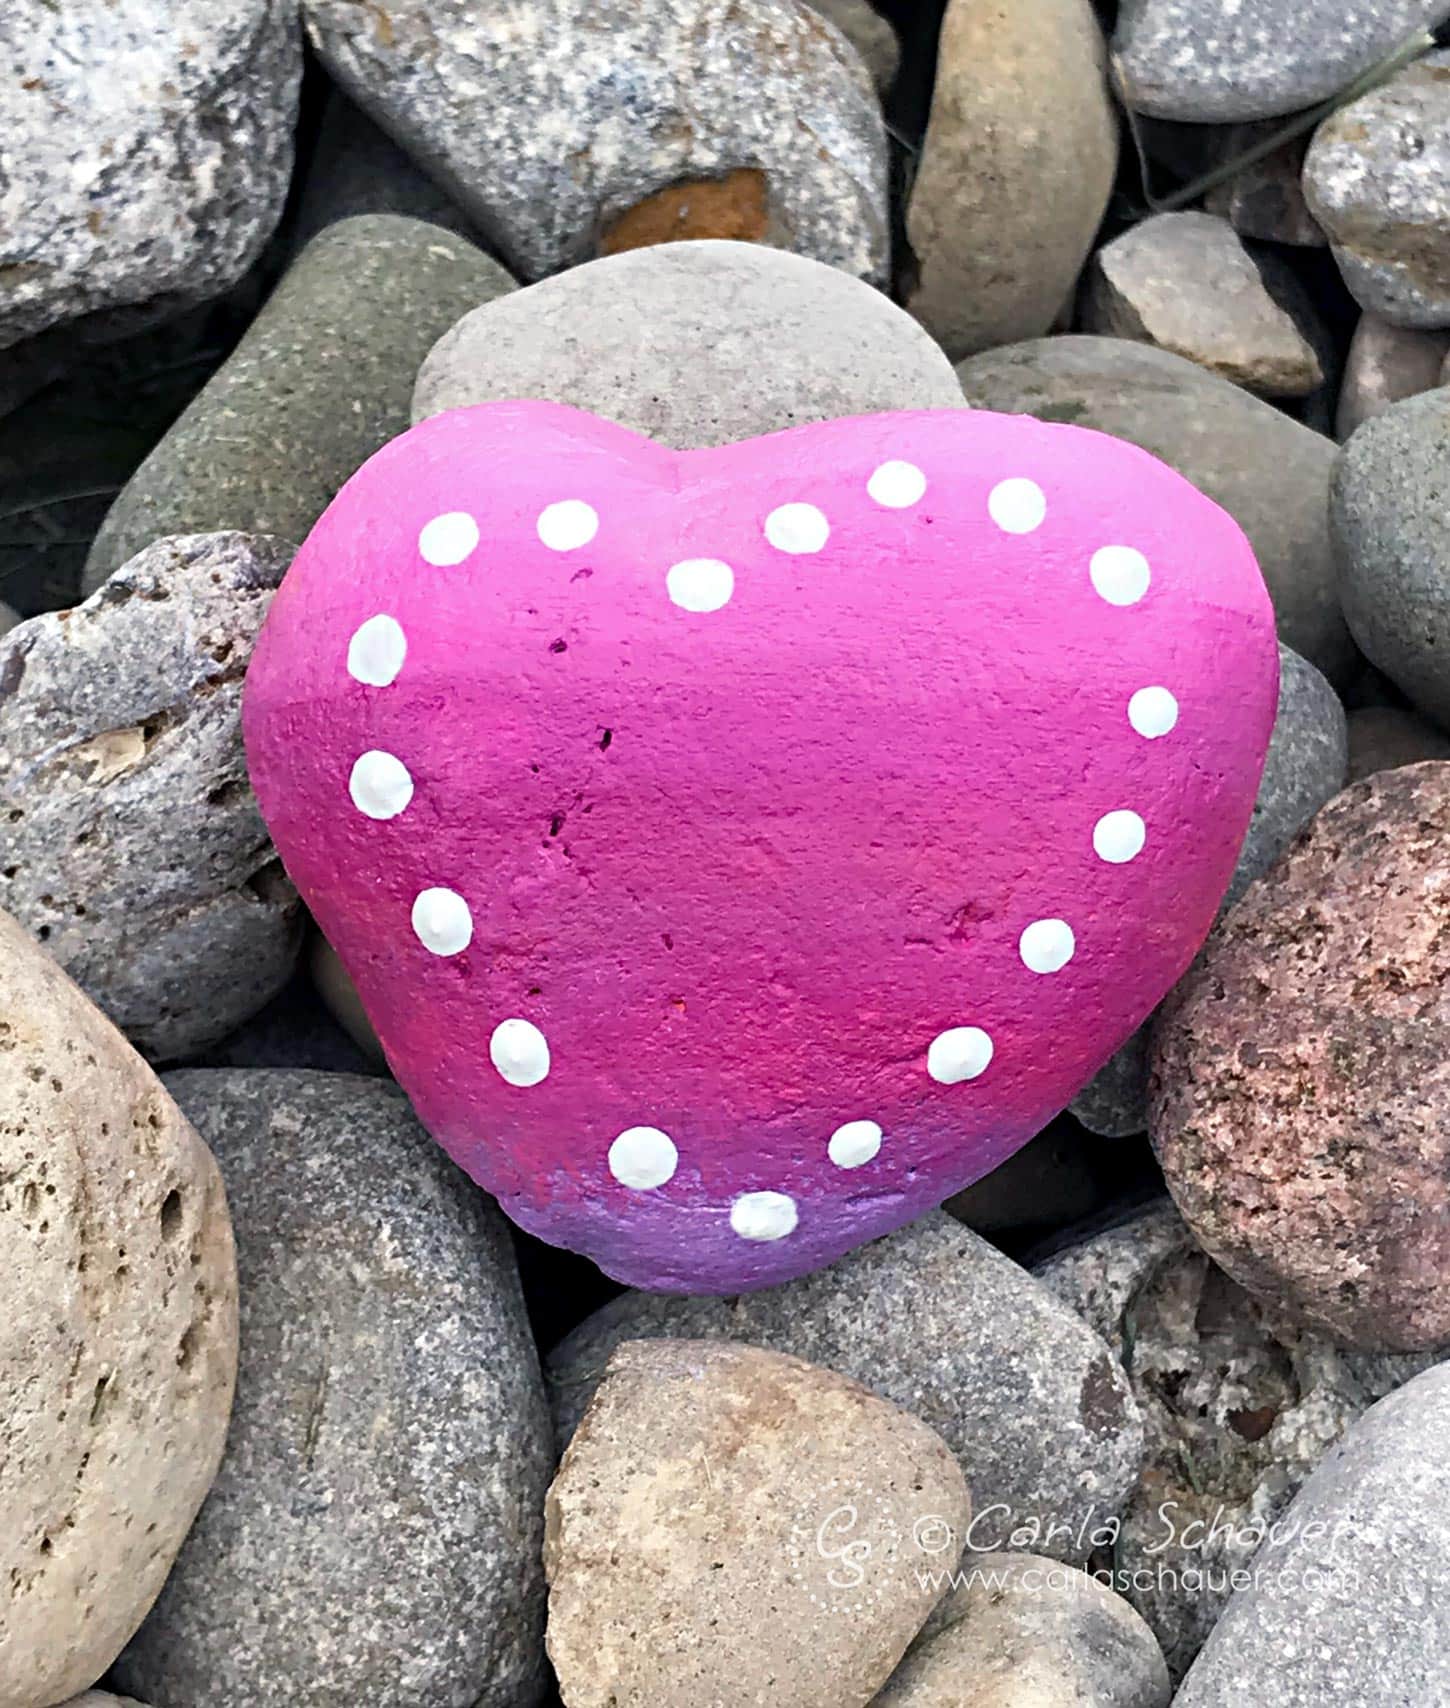 This would be adorable to make at camp! Ombre heart painted rock from Carla Schauer Designs. See easy painted rock ideas from carlaschauer.com. #easypaintedrocks #paintedrockideas #paintedrocks #rockpainting #decoratedrocks #ombre #heart #heartart #polkadots